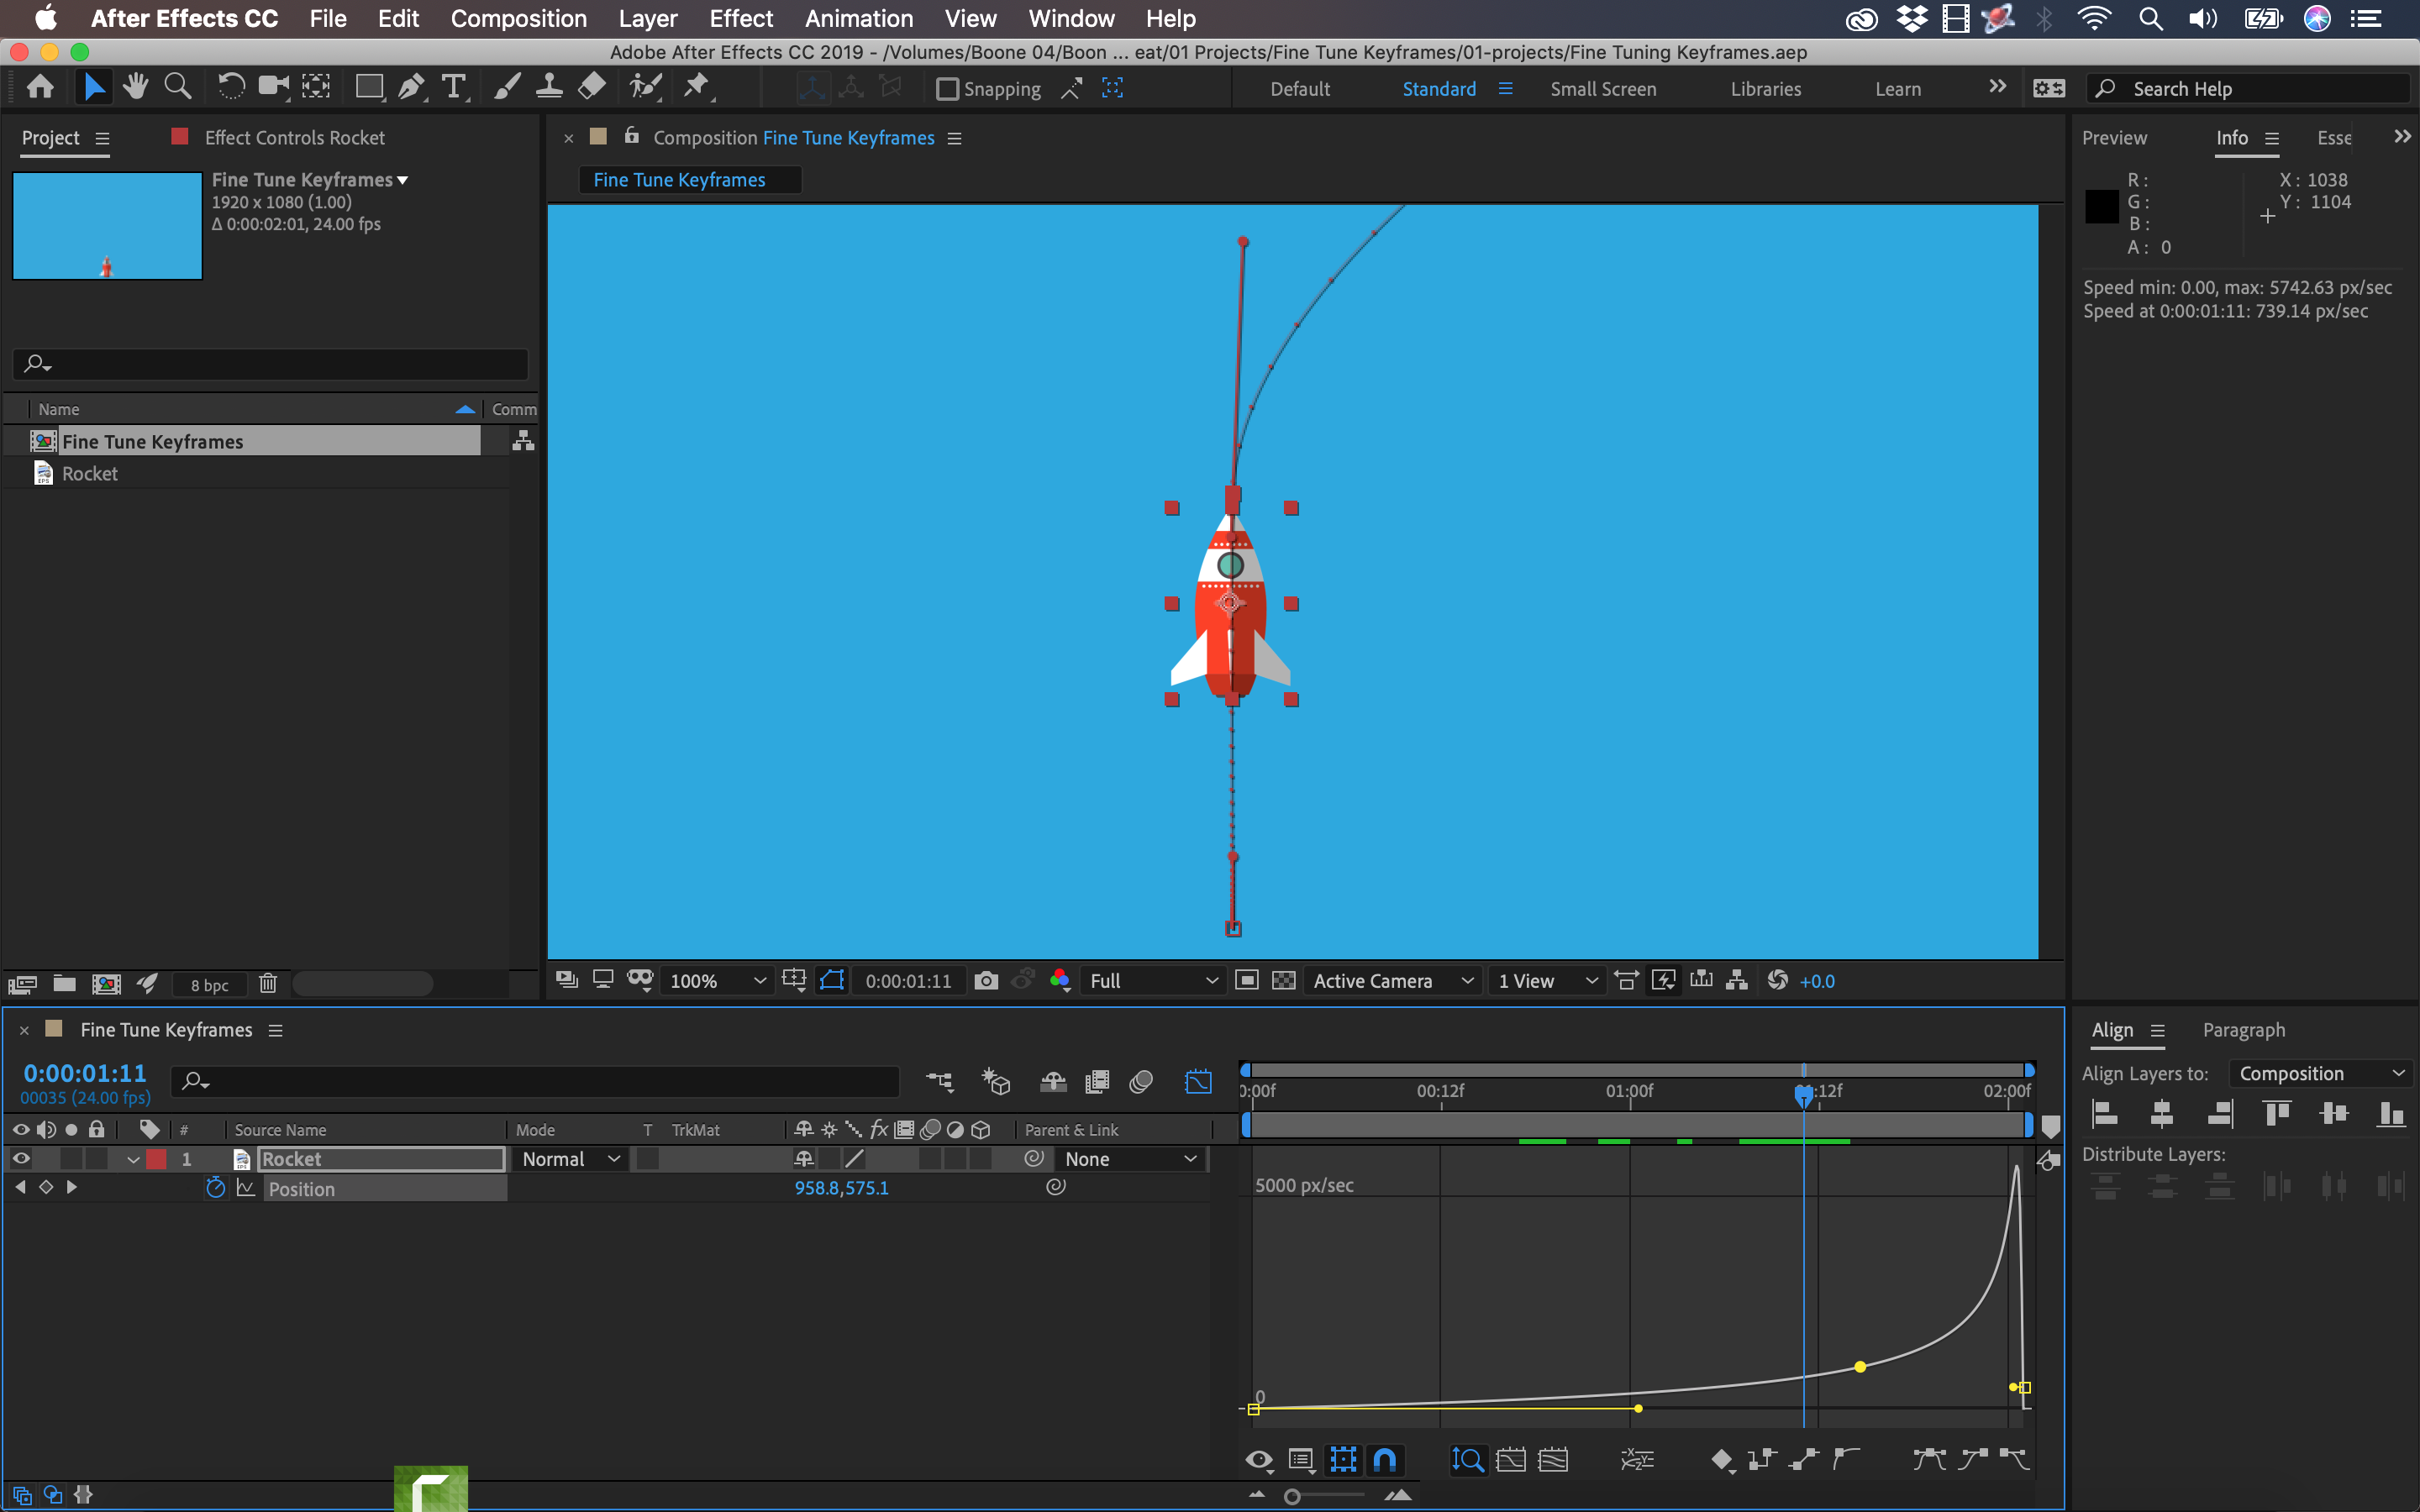 Video Tutorial: How to Fine-Tune Keyframes in Adobe After Effects — Move Motion Paths